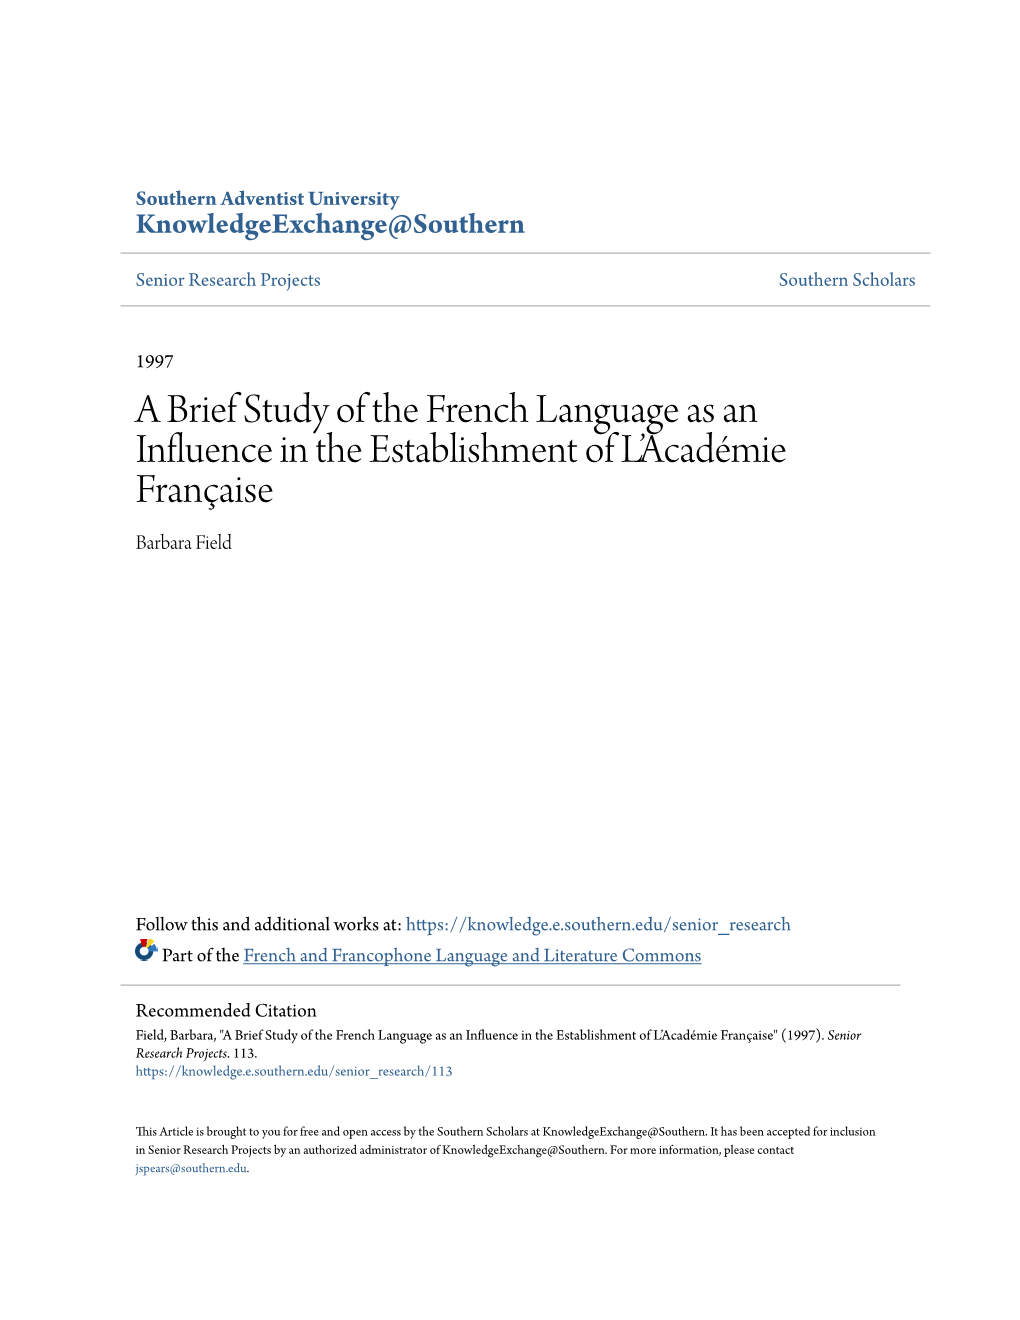 A Brief Study of the French Language As an Influence in the Establishment of L’Académie Française Barbara Field